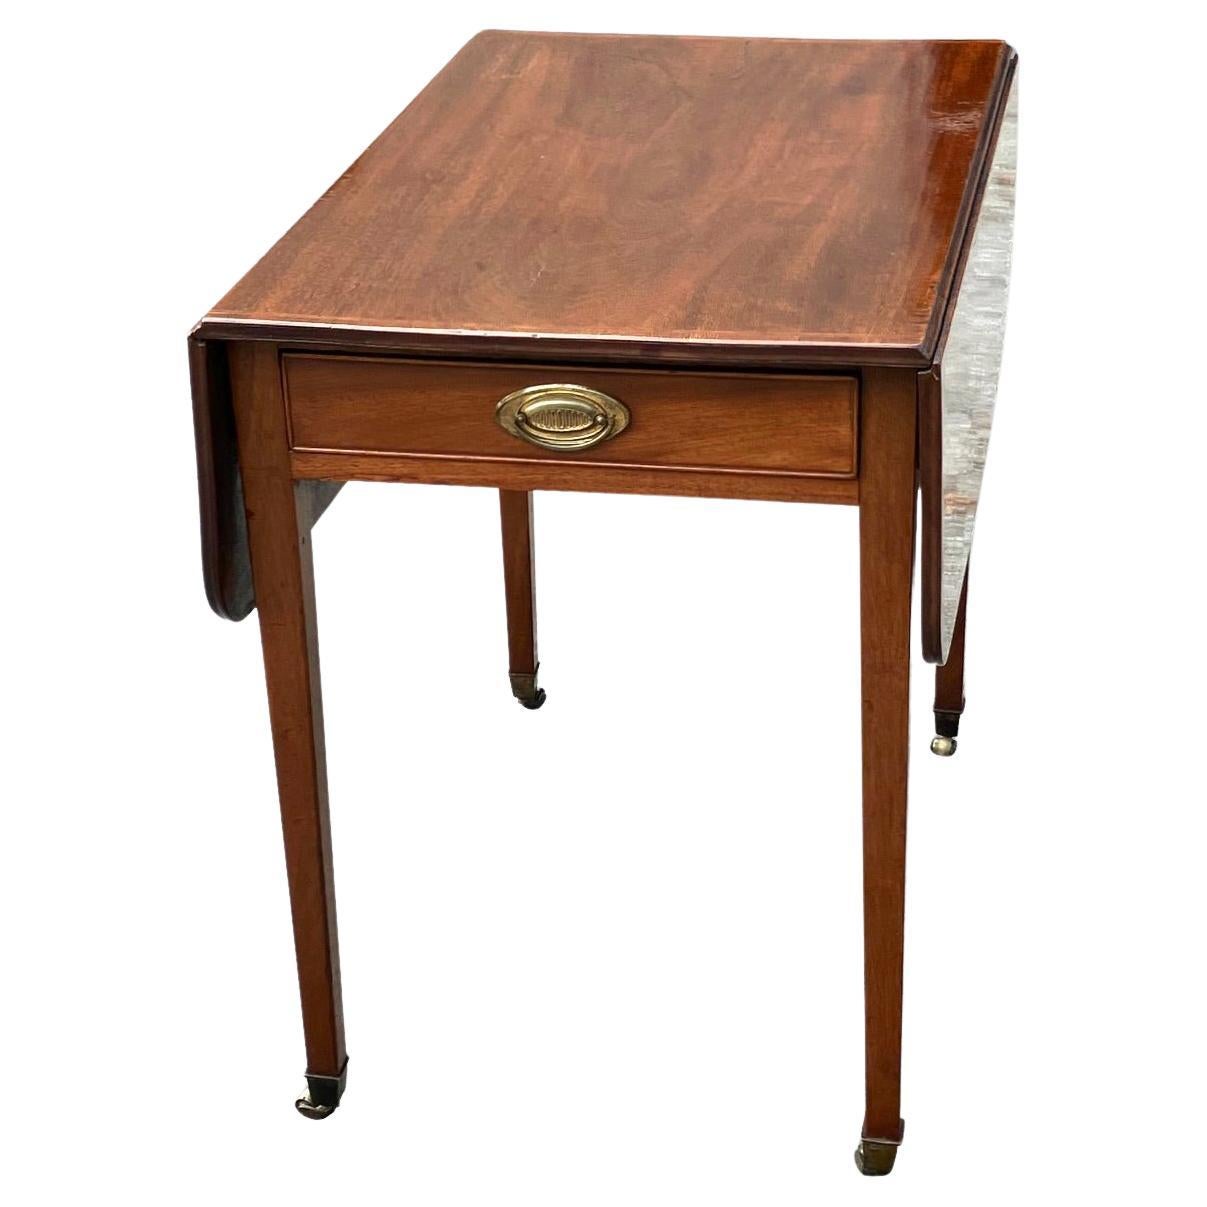 English Rectangular Georgian Period Mahogany Pembroke Table with Single Drawer For Sale